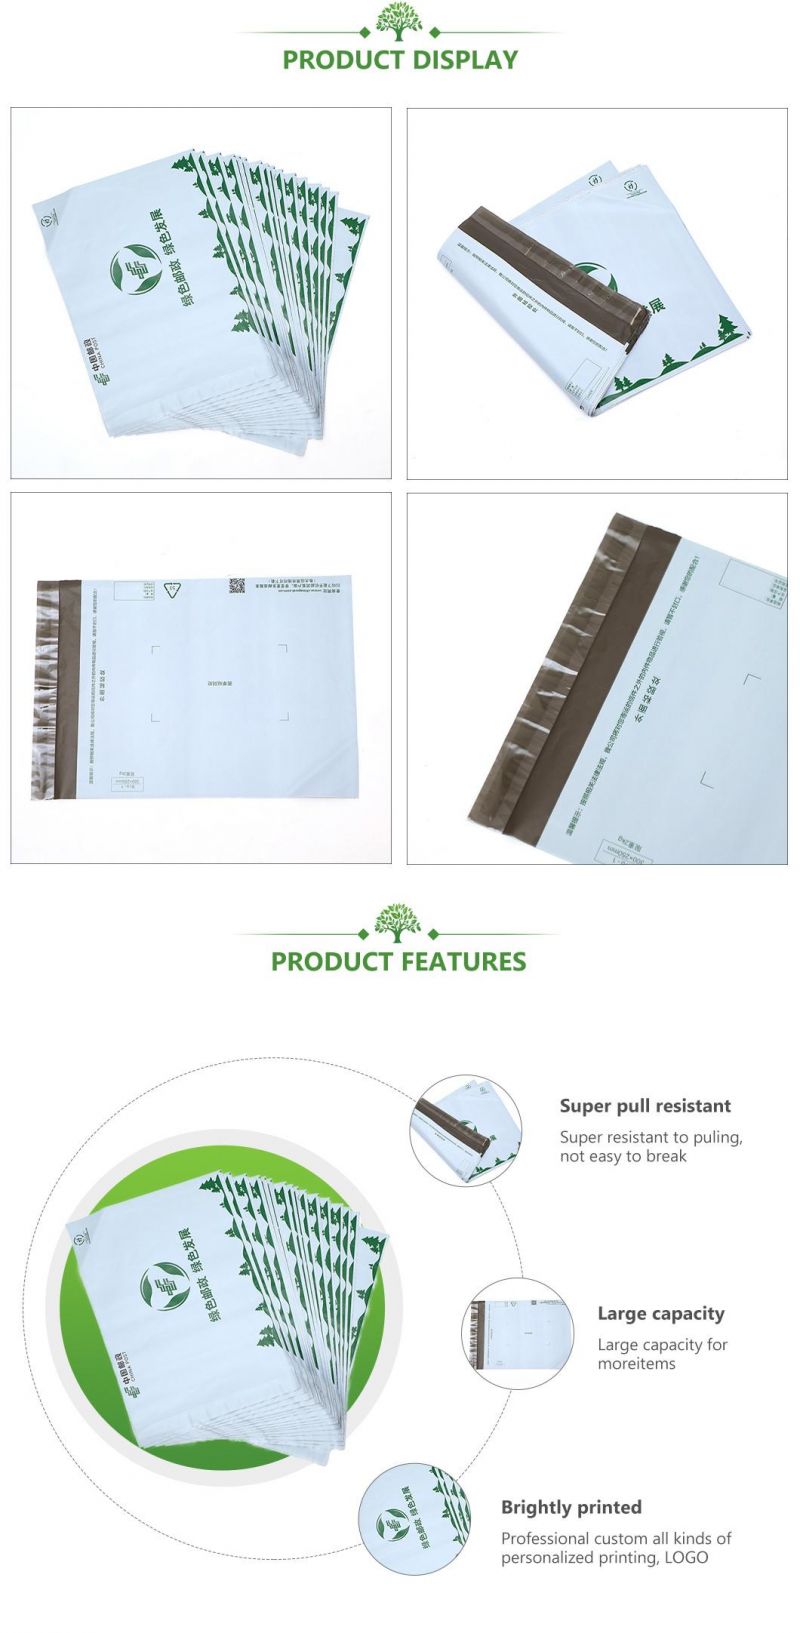 100% Biodegradable and Compostable Mailing Bags,Courier Bags. Poly Mailer Bags, Delivery Bags,Express Bags Manufacturer with Brc, BSCI,CE, Grs,Bpi,FDA,Seeding,O